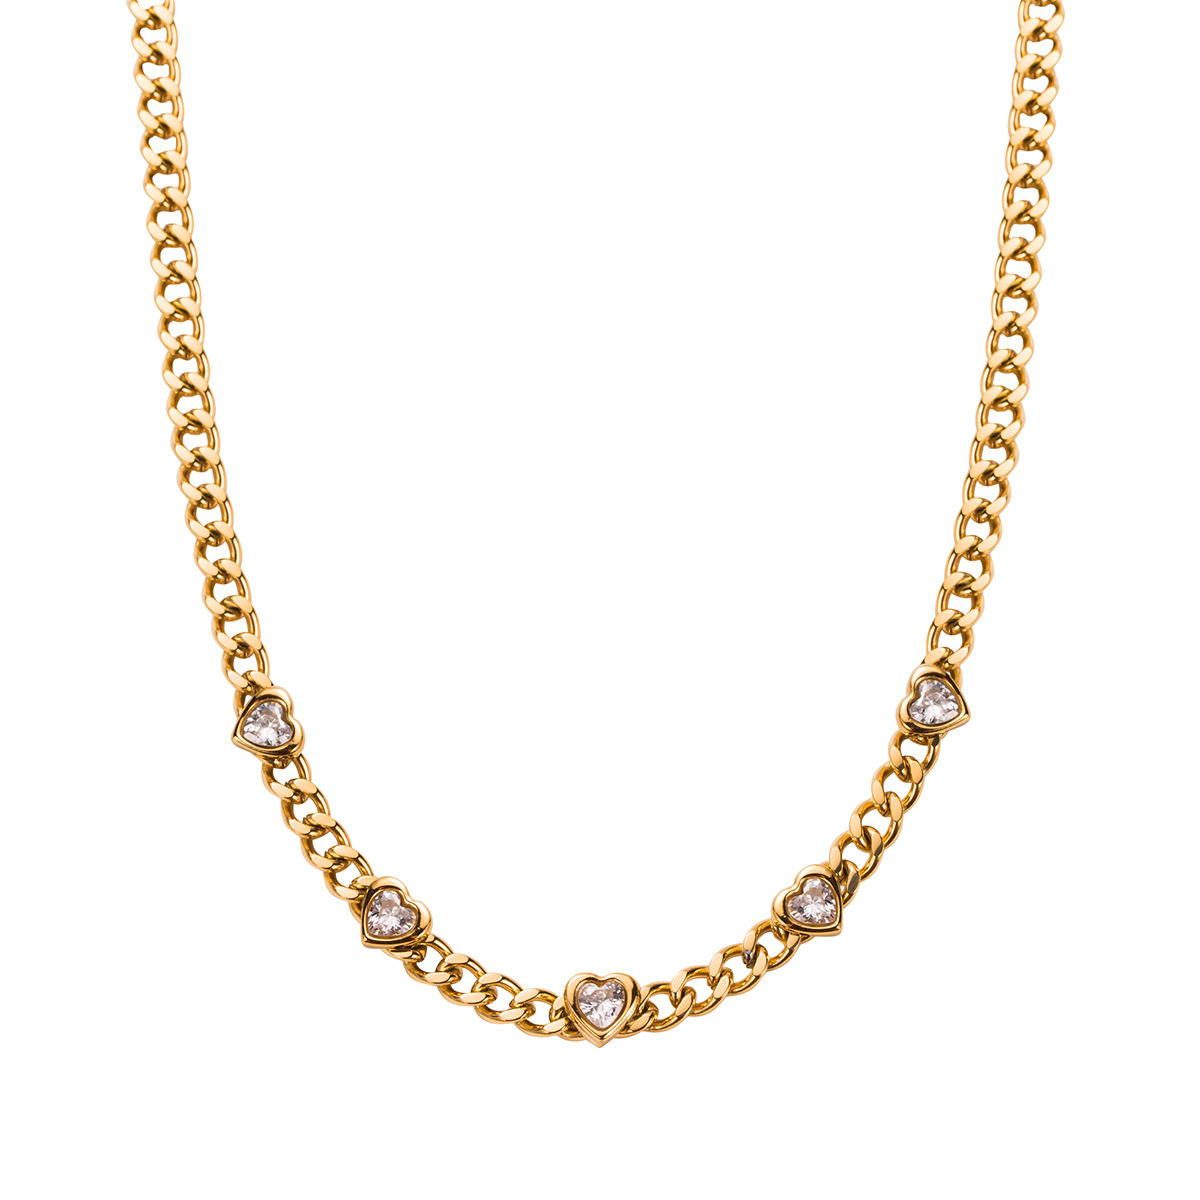 3:C necklace 16-18inch